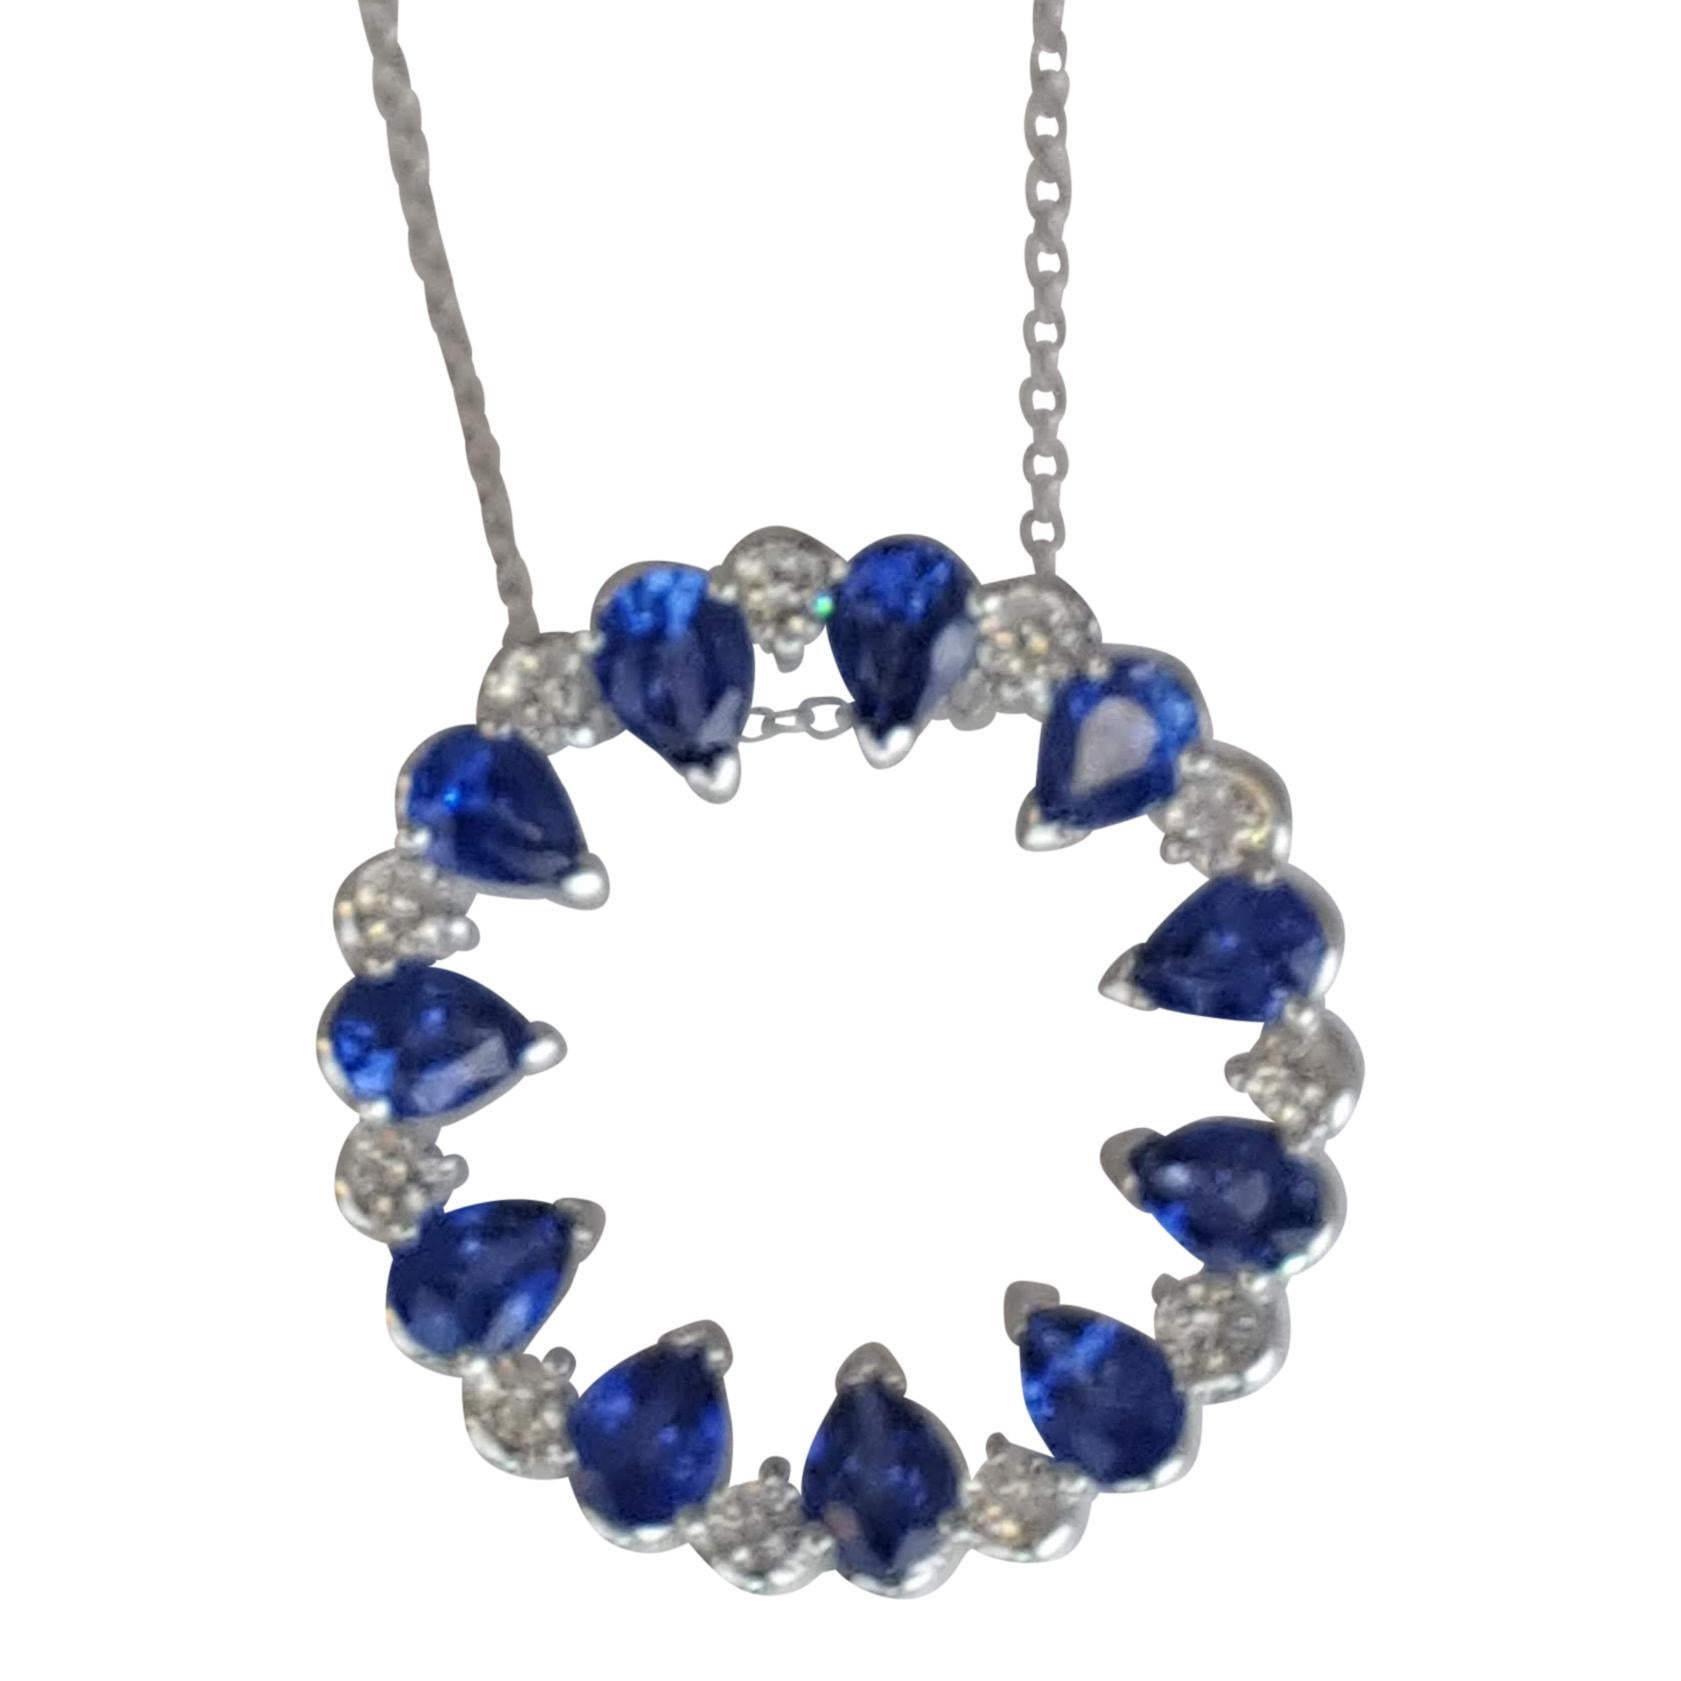 This magnificent pear shape sapphire pendant is a true embodiment of sophistication and luxury, meticulously crafted to capture the essence of beauty.

Reminiscent of the endless skies and vast oceans, the eleven pear-shaped blue sapphires, totaling